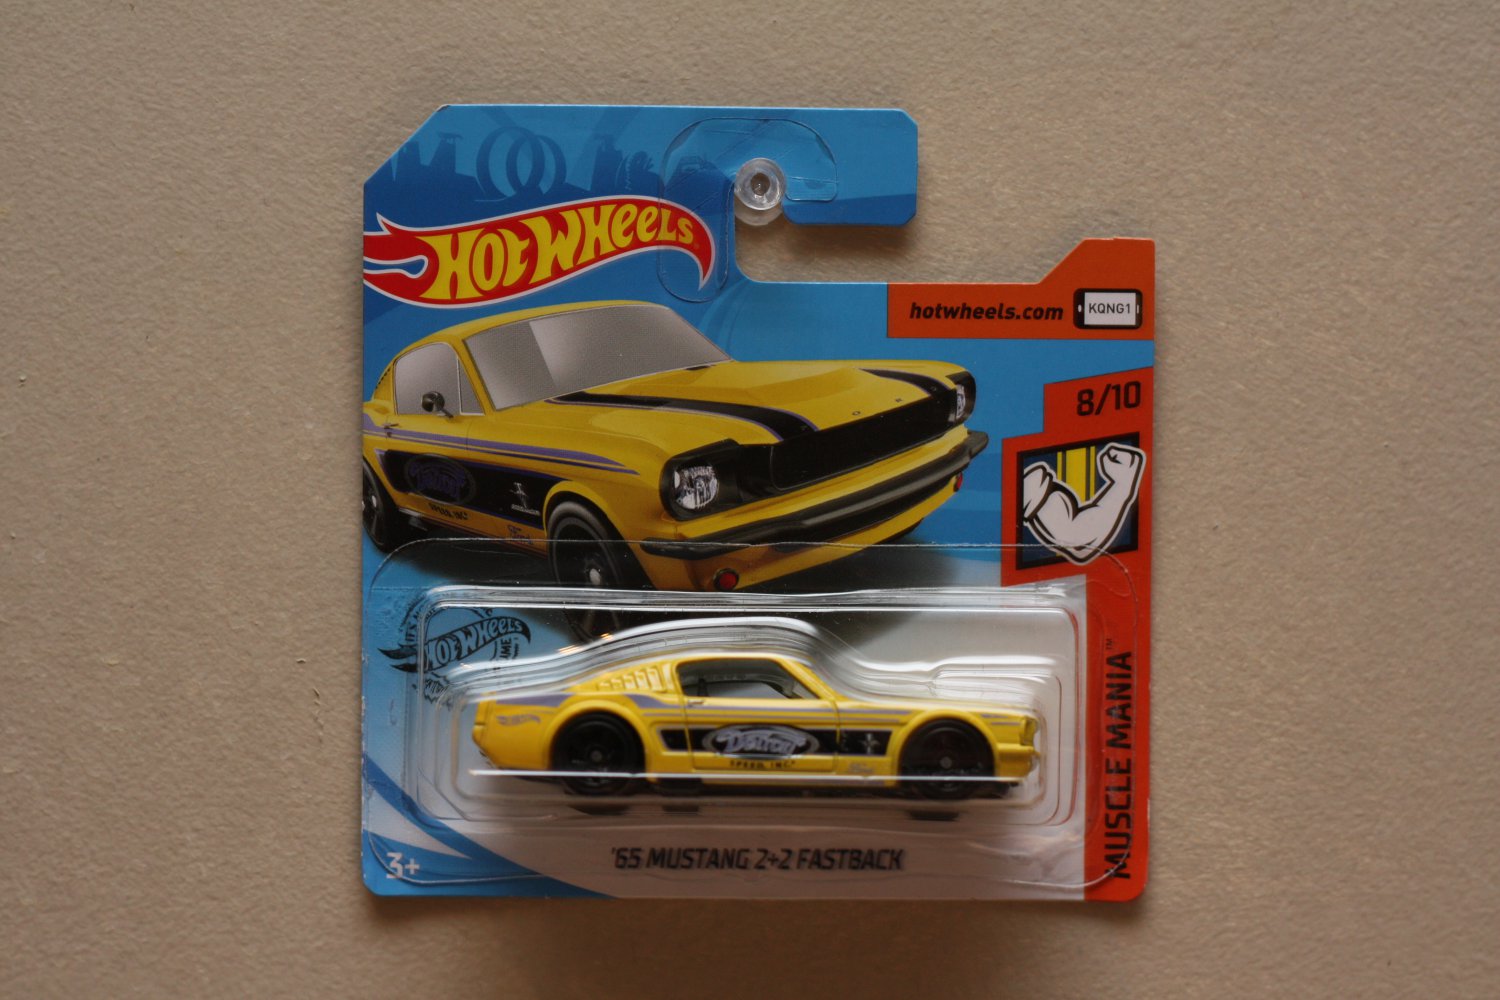 Hot Wheels 2019 Muscle Mania '65 Mustang 2+2 Fastback (yellow)